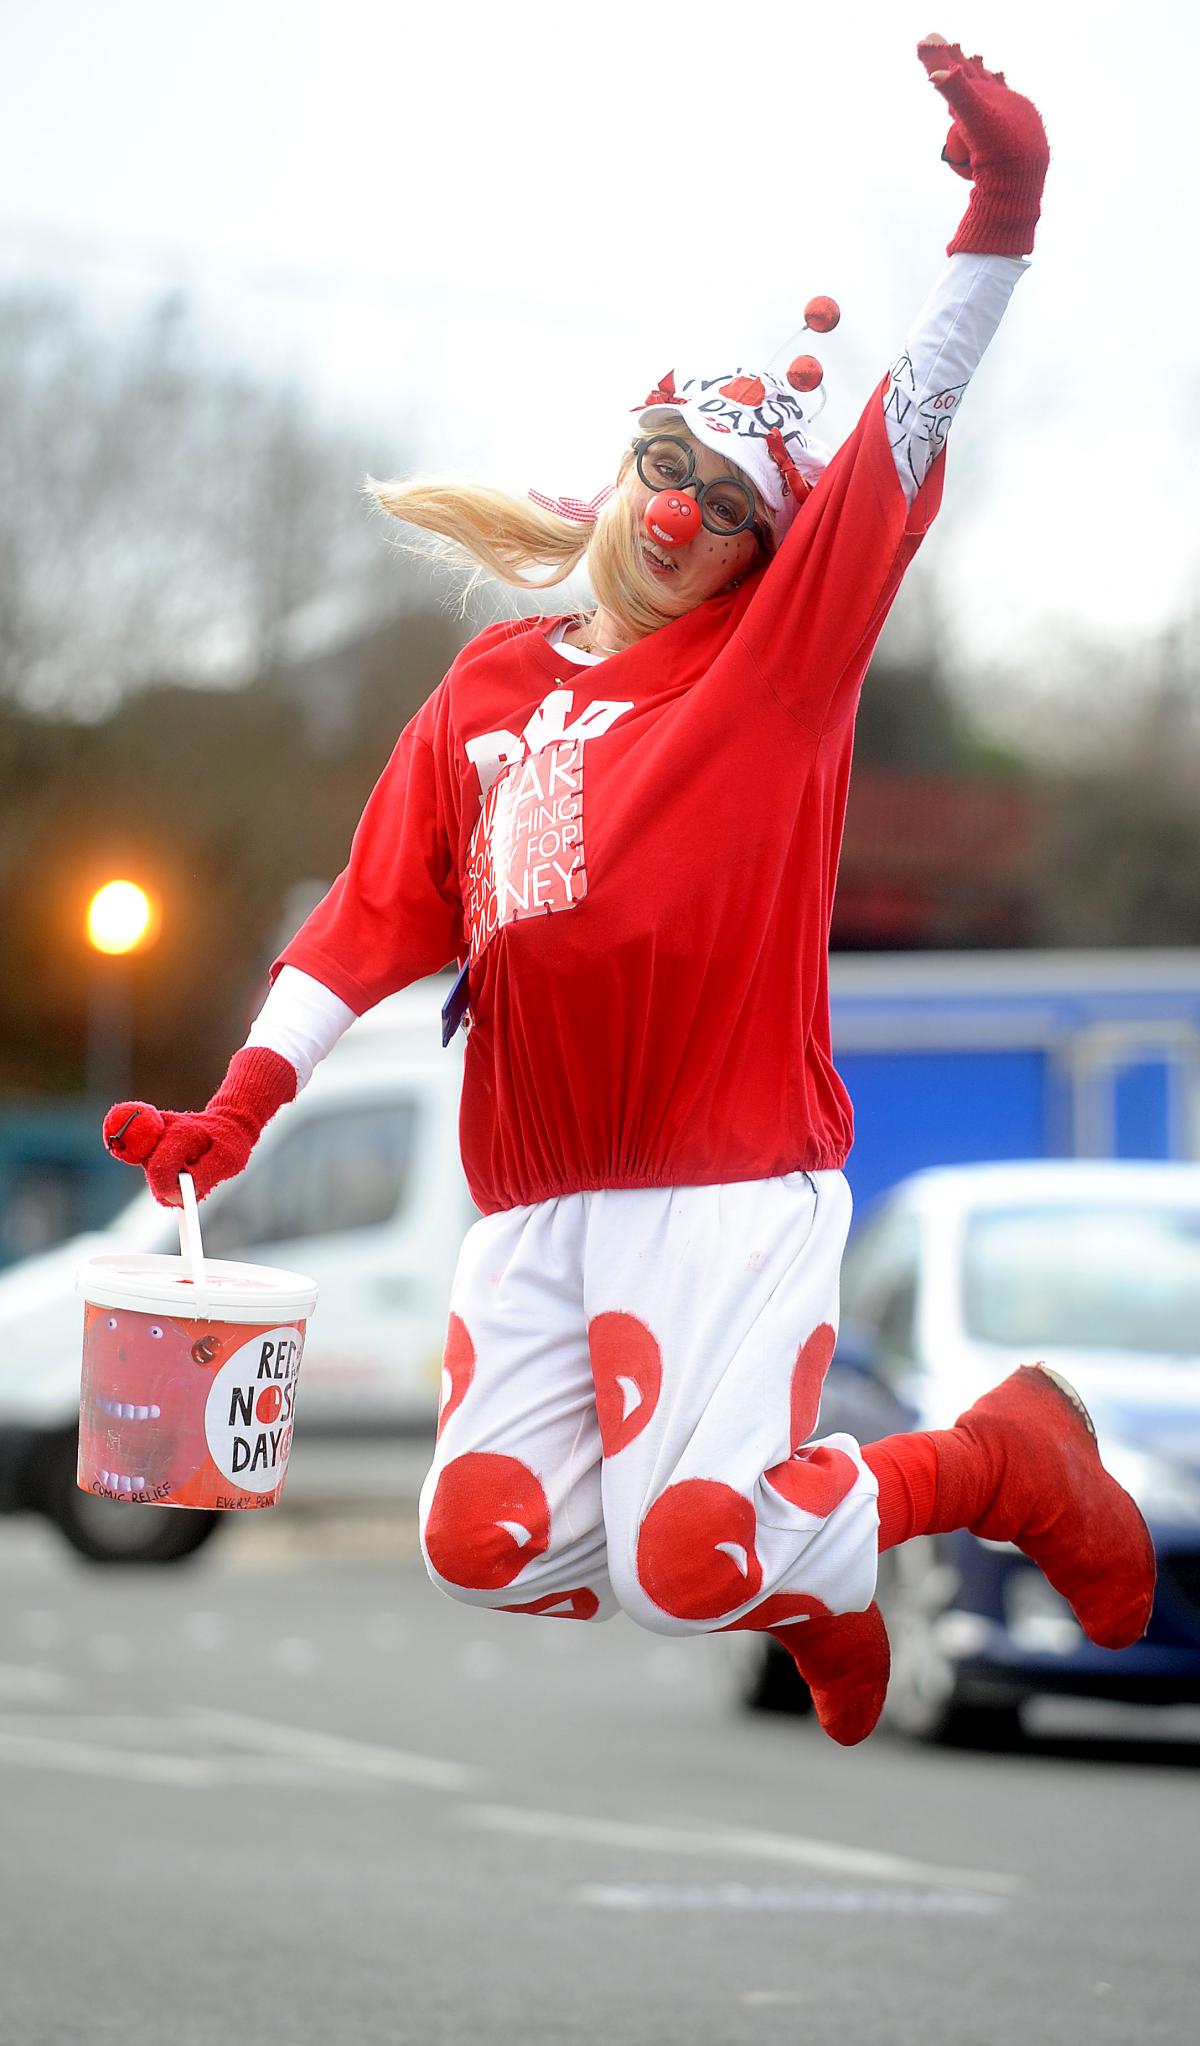 Joanne Ballantyne walked from Baildon to Greengates to raise money for Comic Relief Red Nose Day.